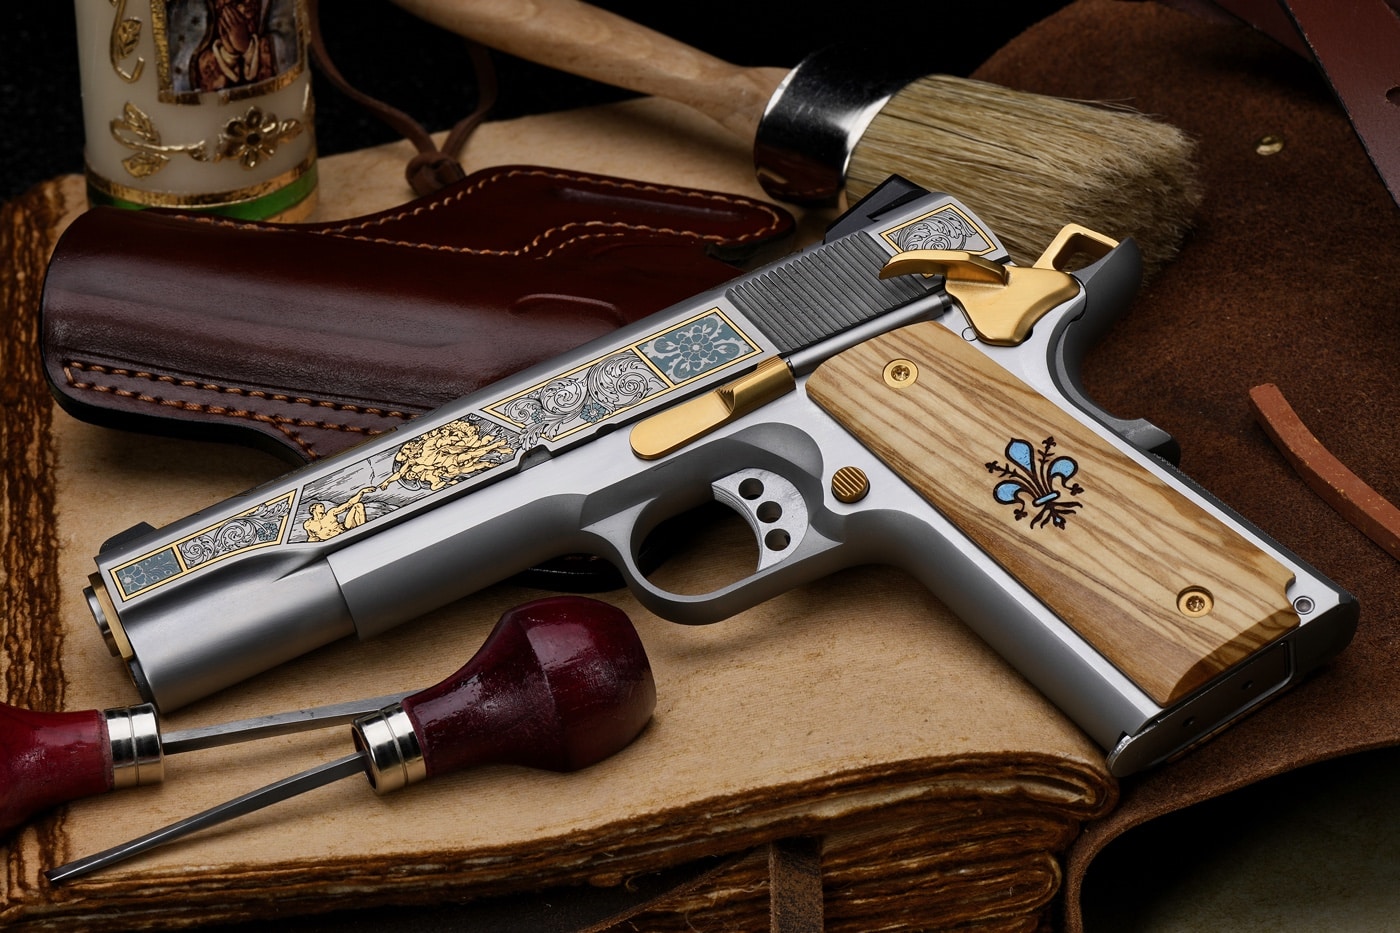 Shown is the left side of the Michelangelo 1911 handgun. On the slide is a recreation of the Creation of Adam.